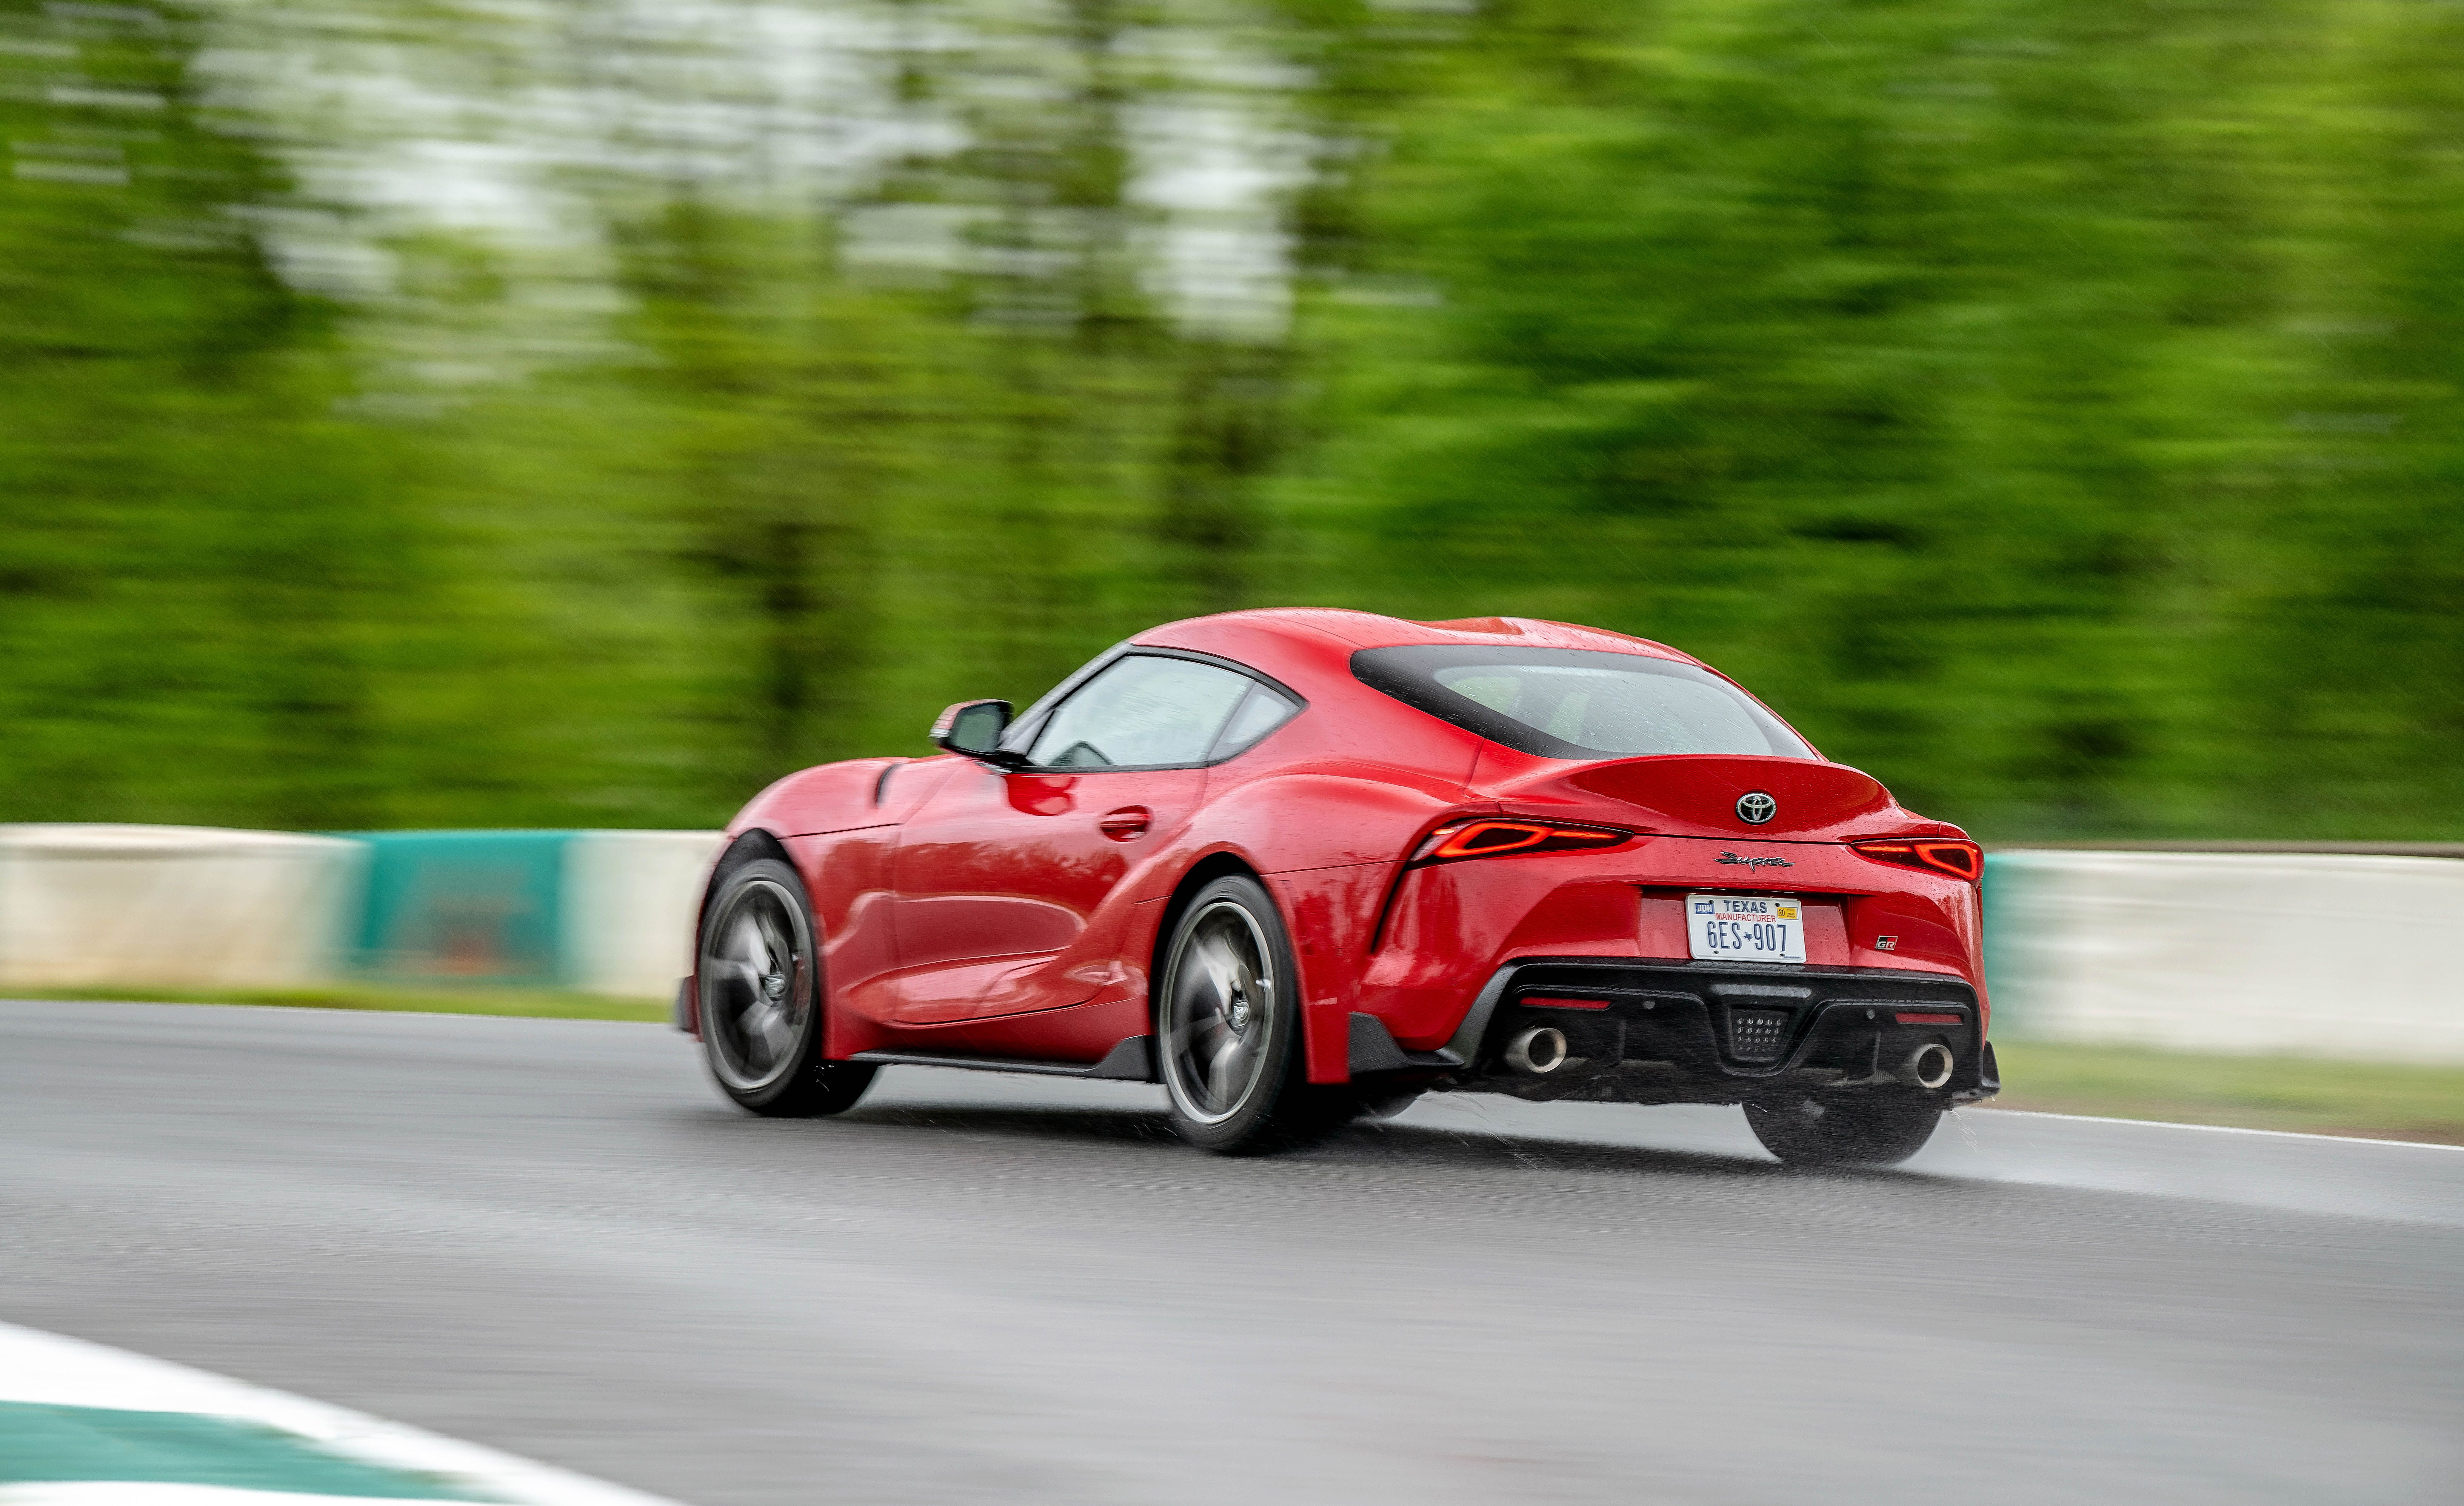 2020 Toyota Supra review: A solid sports car that's rife with